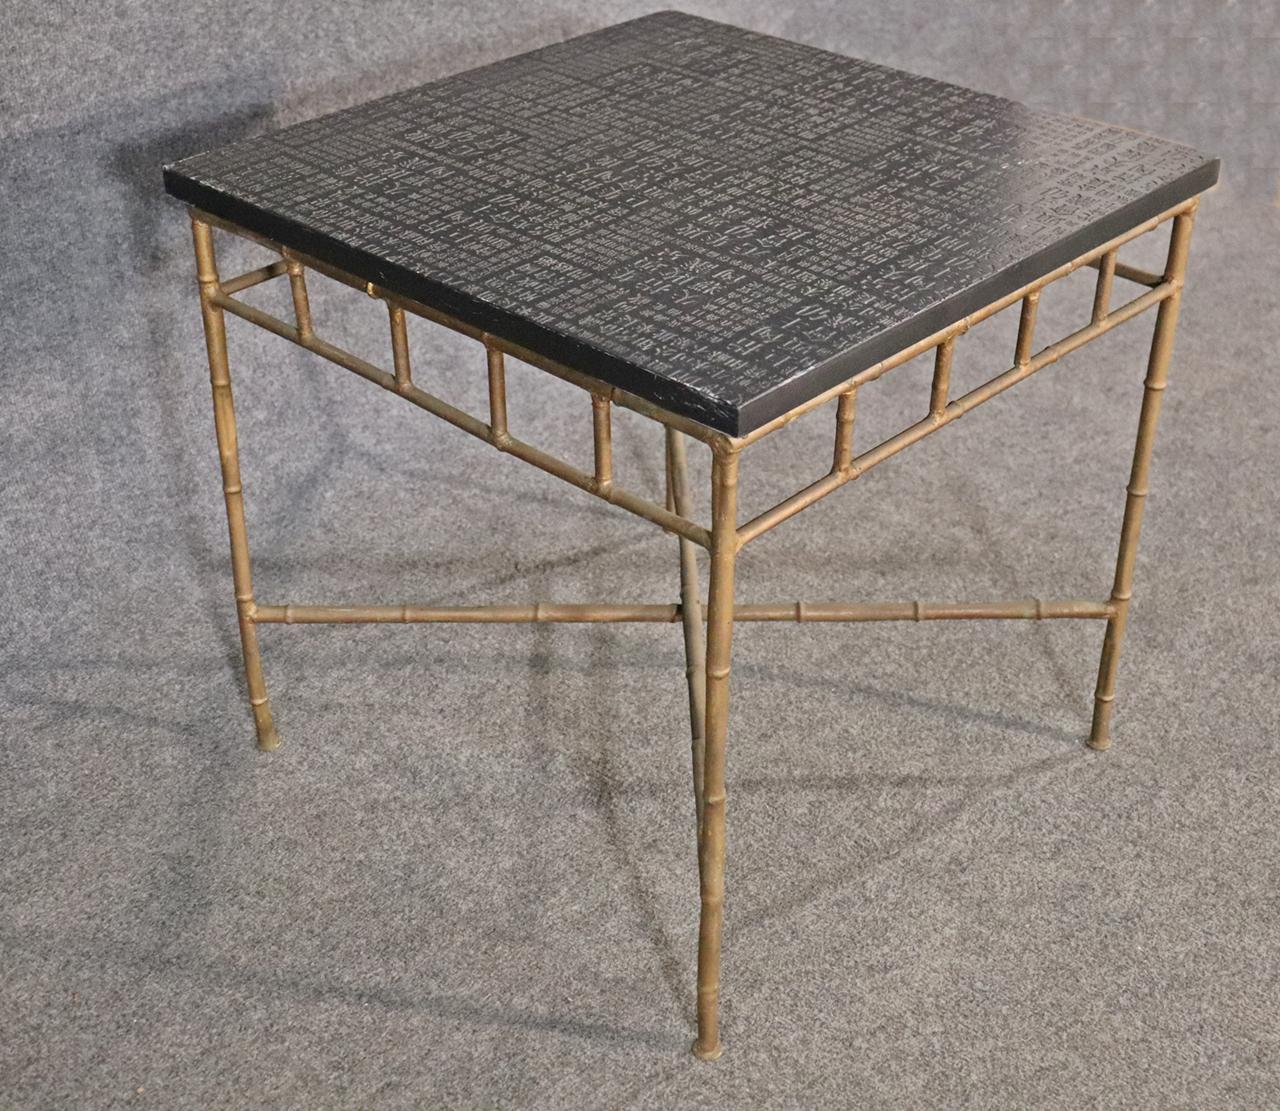 Slate or possible stone Asian character top.  Faux bamboo metal base. 20 1/4